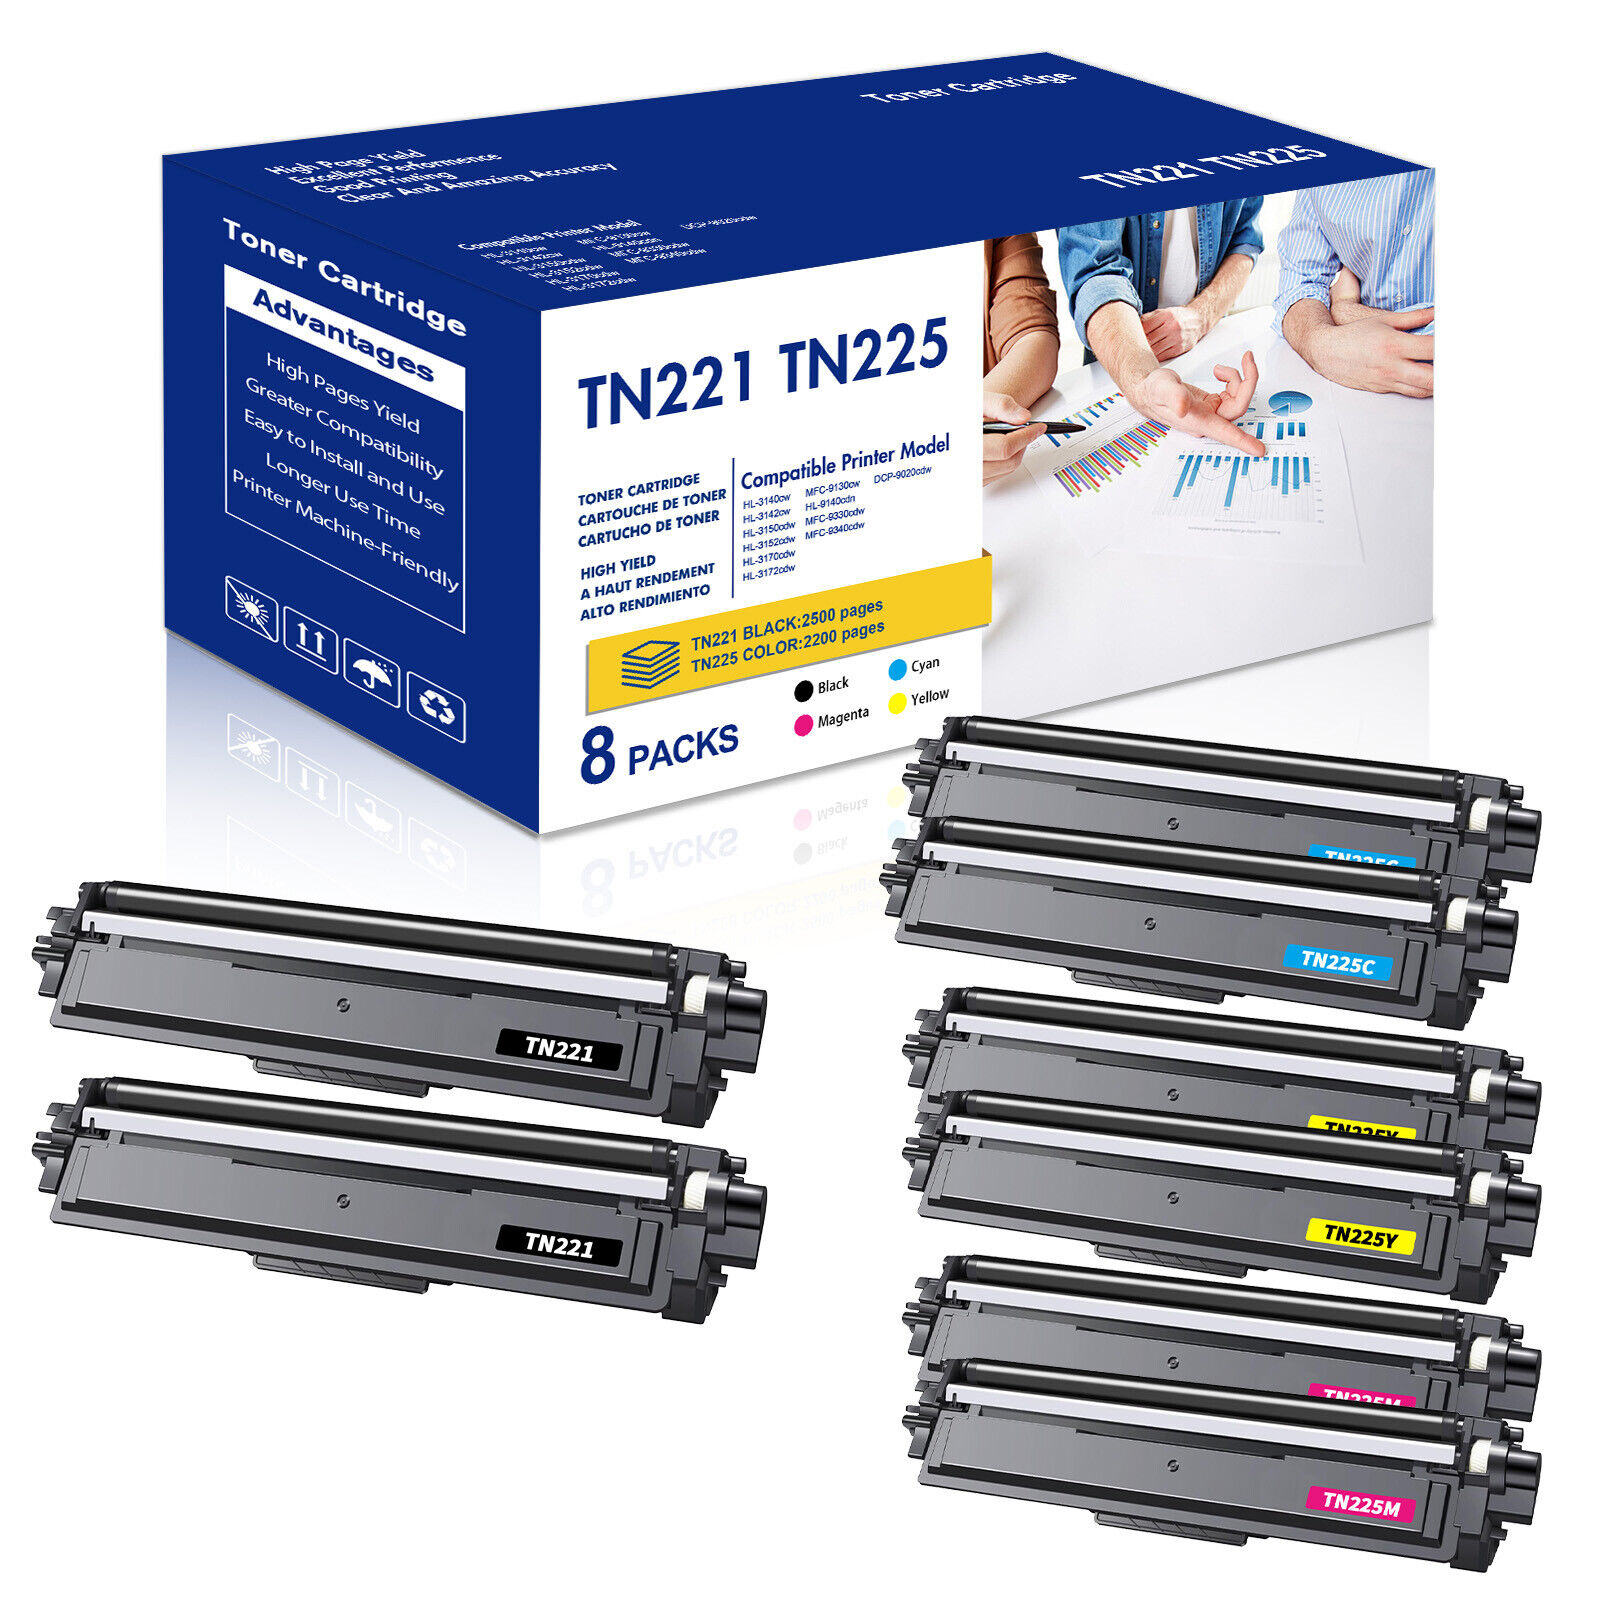 8PK TN221 TN225 Toner Compatible With Brother HL-3170CDW MFC-9340CDW MFC-9130CW